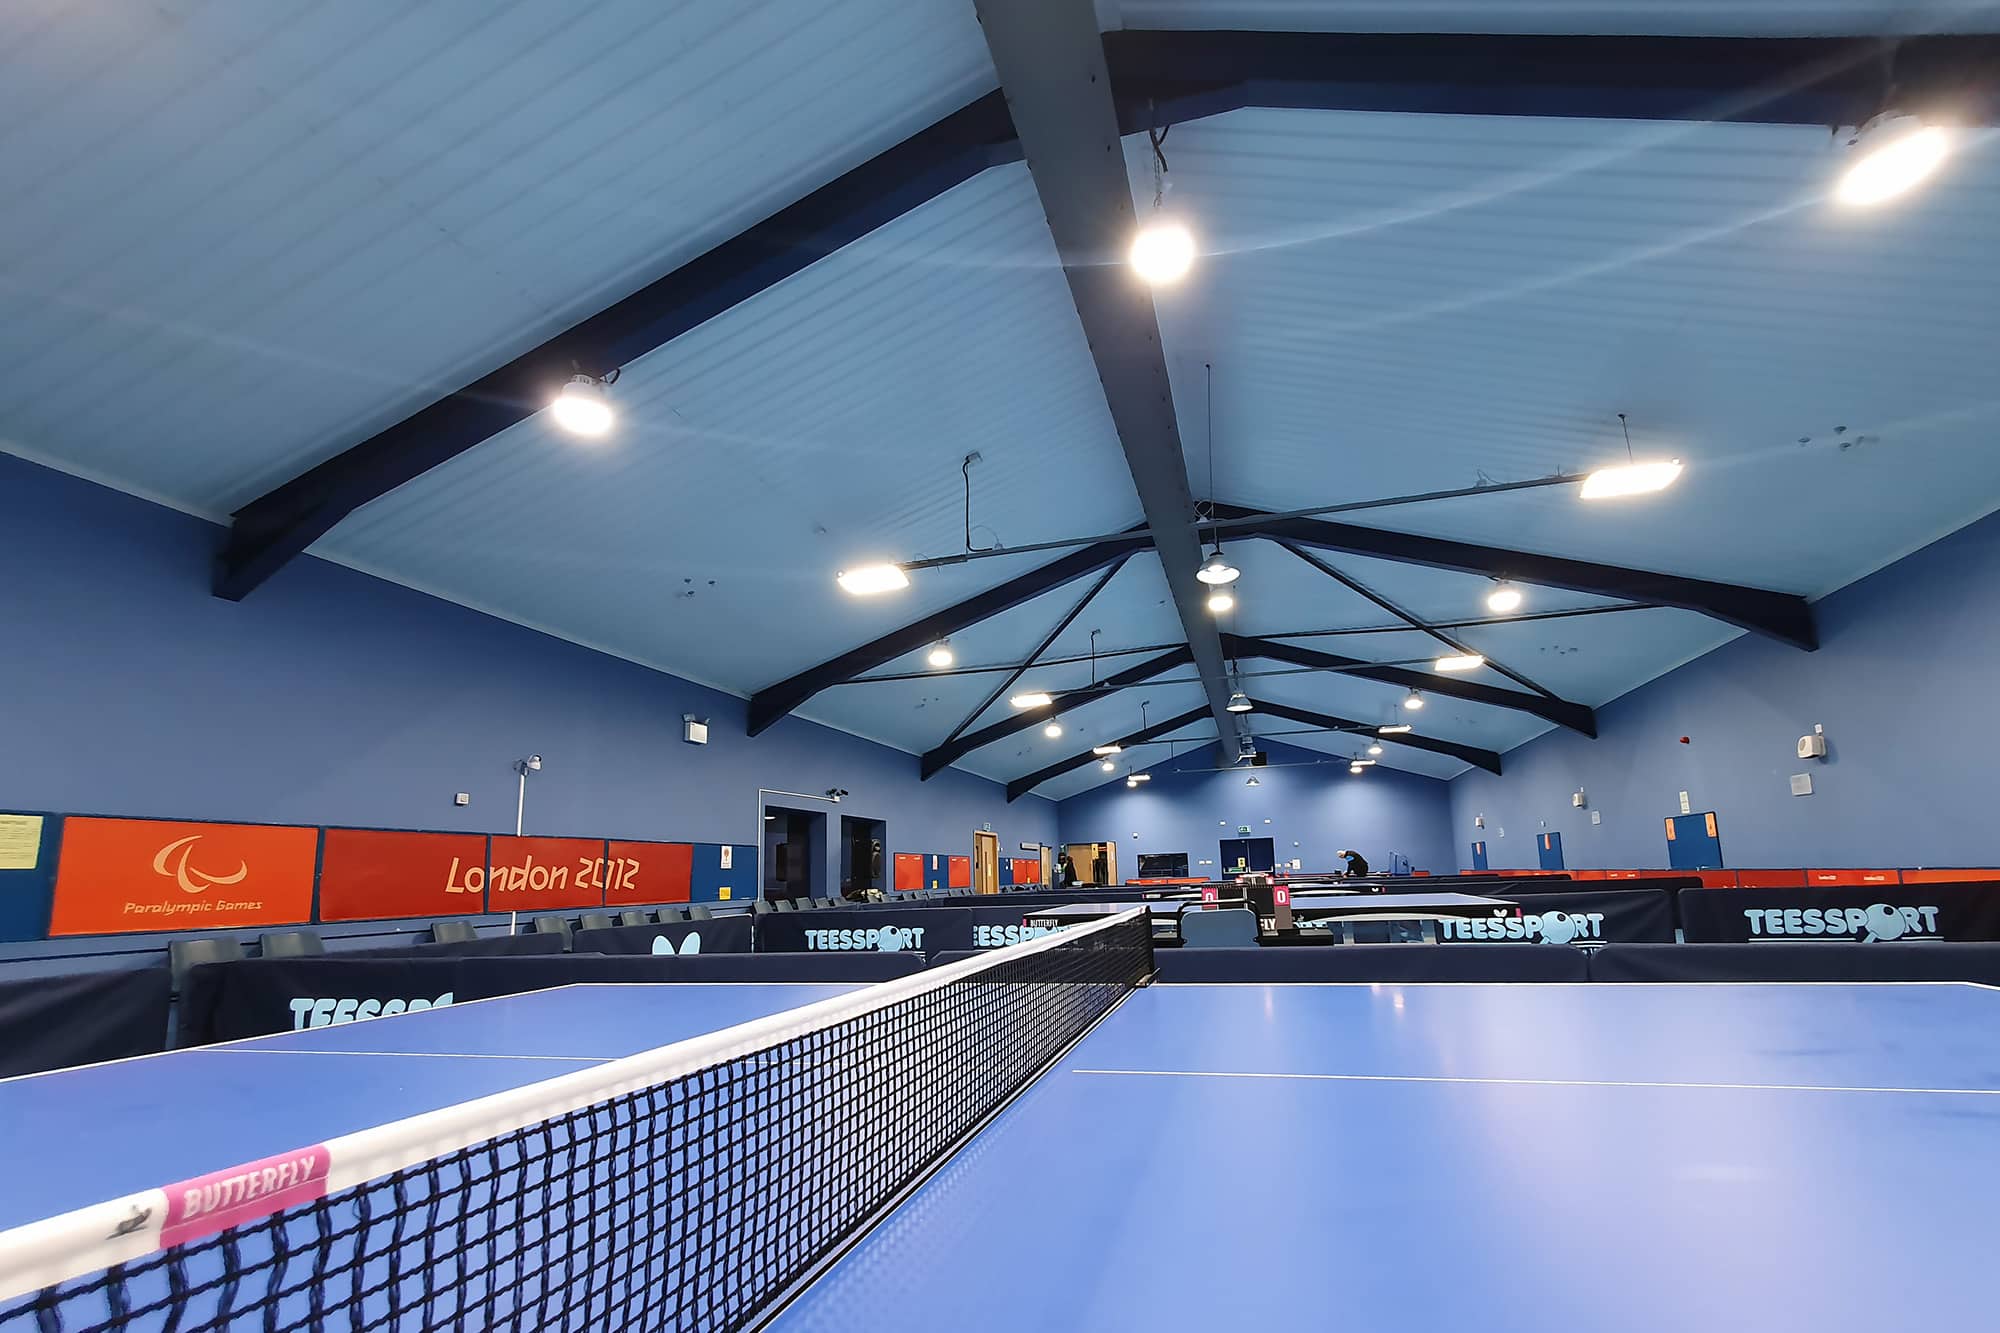 Table tennis hall ventilation with a Prihoda fabric duct